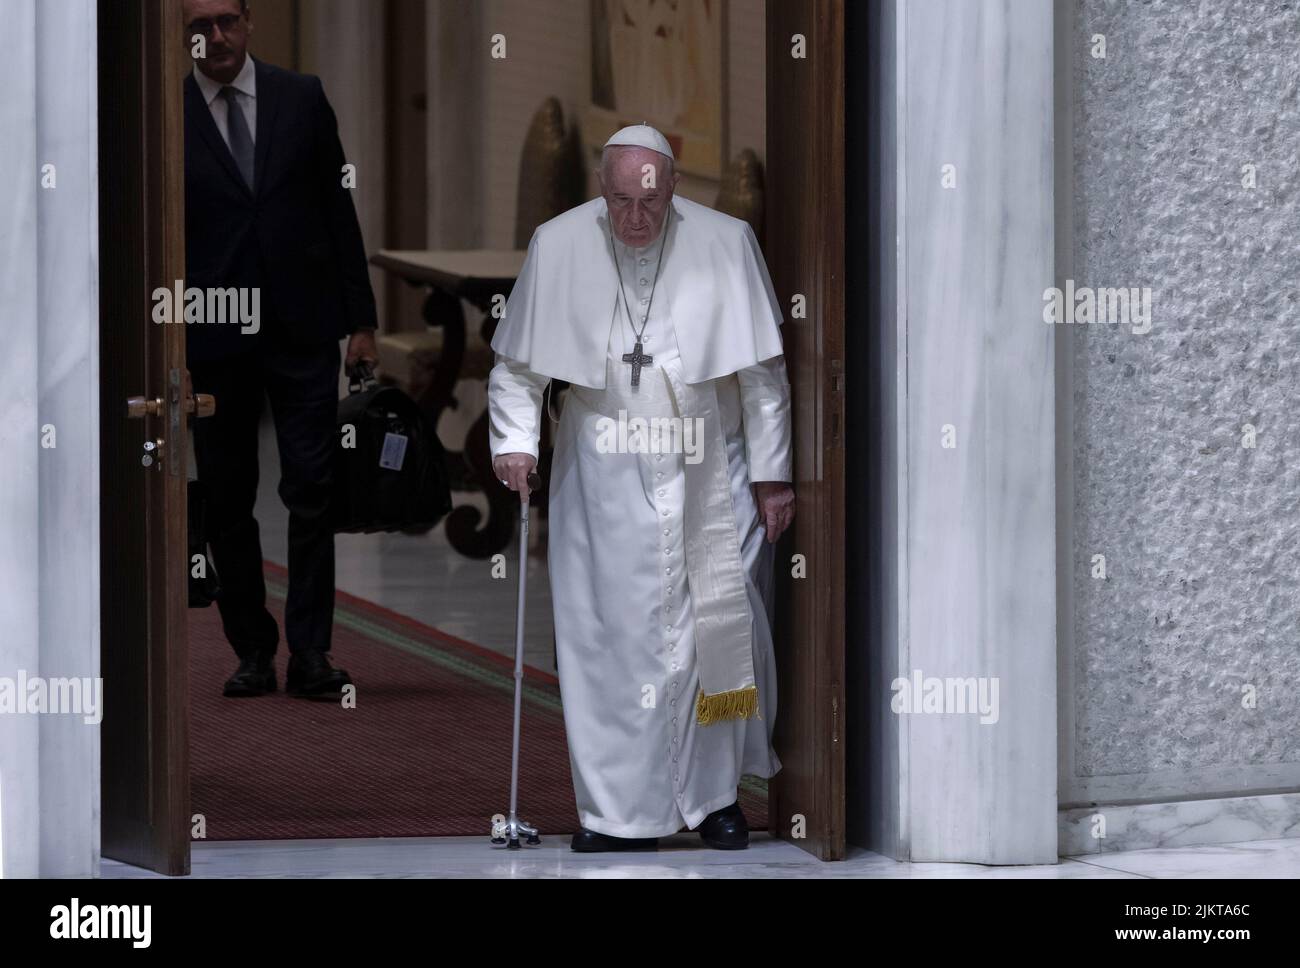 Vatican City, Vatican, 3 August 2022.  Pope Francis arrives walking with his cane at the Wednesday general audience in the Paul VI Hall. Credit: Maria Grazia Picciarella/Alamy Live News Stock Photo